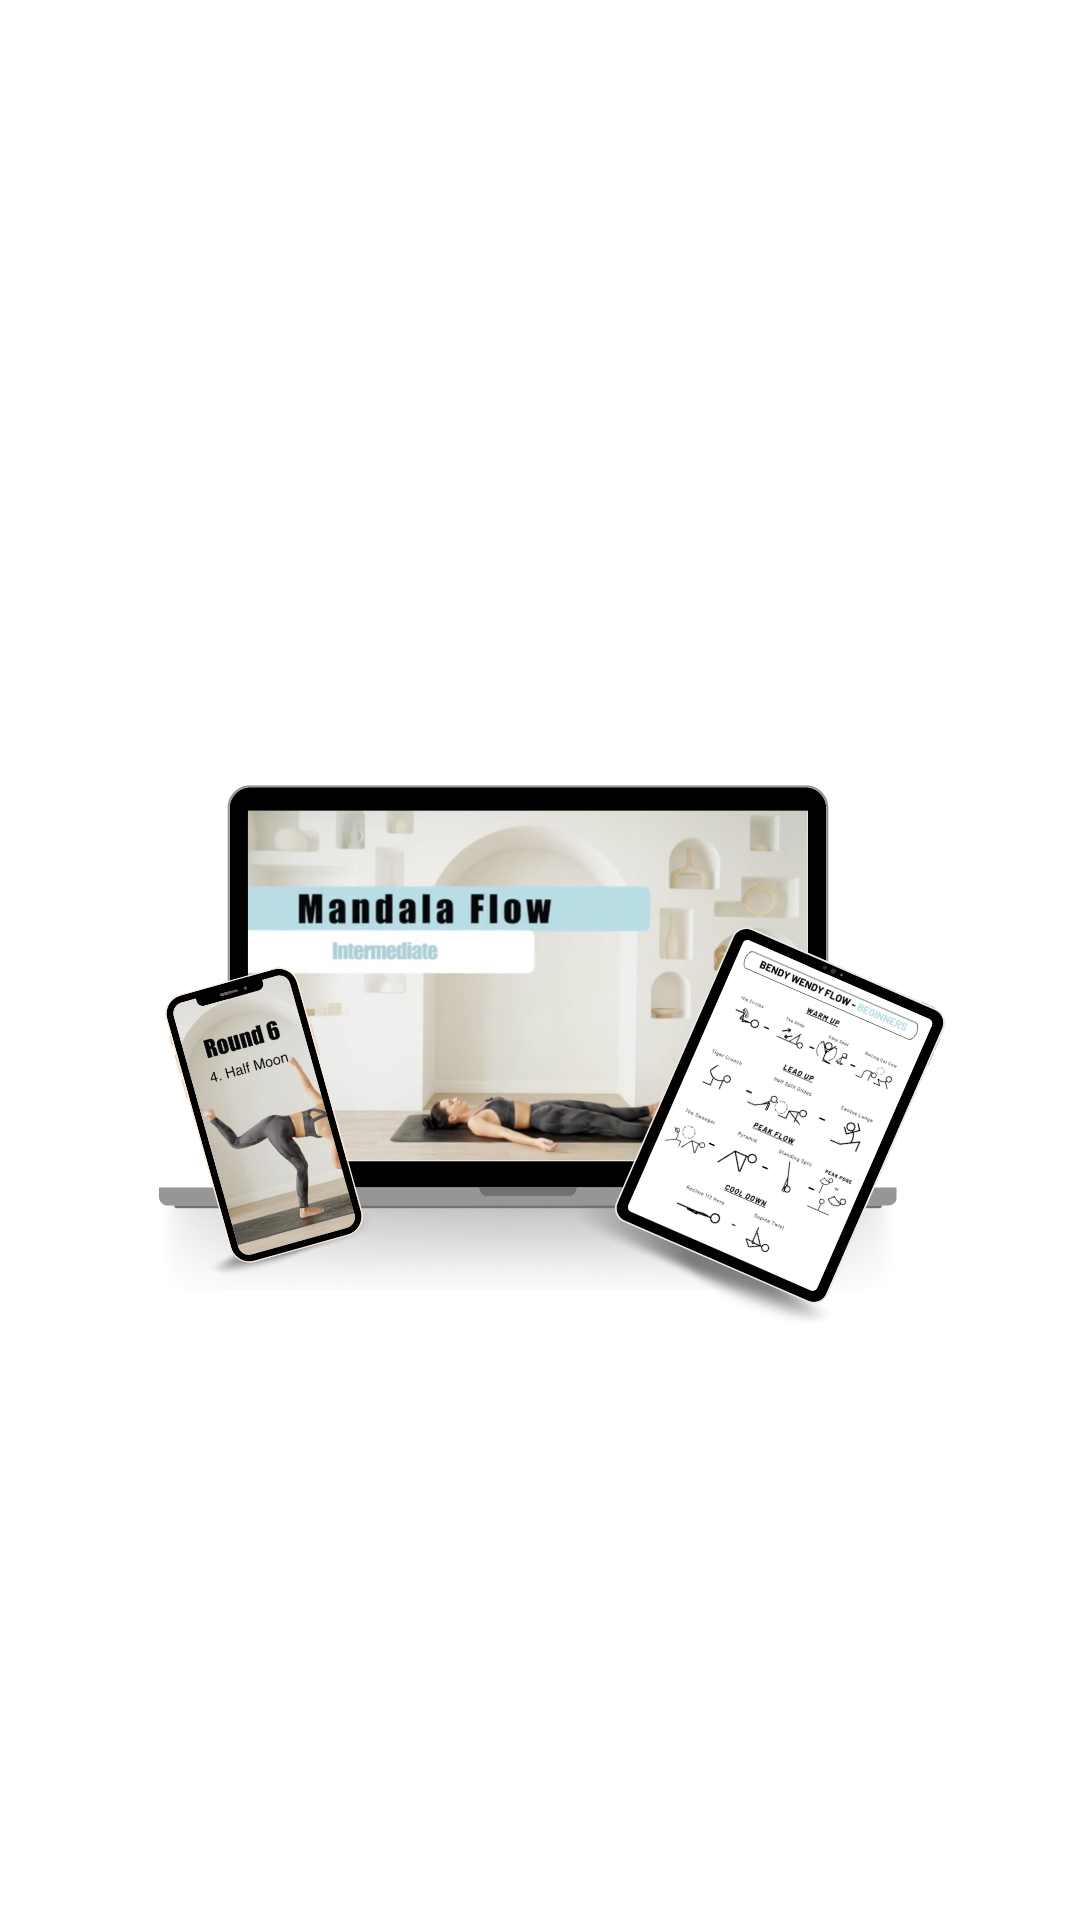 Digital devices displaying Sarah White's Reday-Made Creative Sequences. A laptop screen presents a 'Mandala Flow' for intermediates, a smartphone illustrates a yoga pose labeled 'Round 6 - Half Moon,' and a tablet features 'Bendy Wendy Flow' sequences.